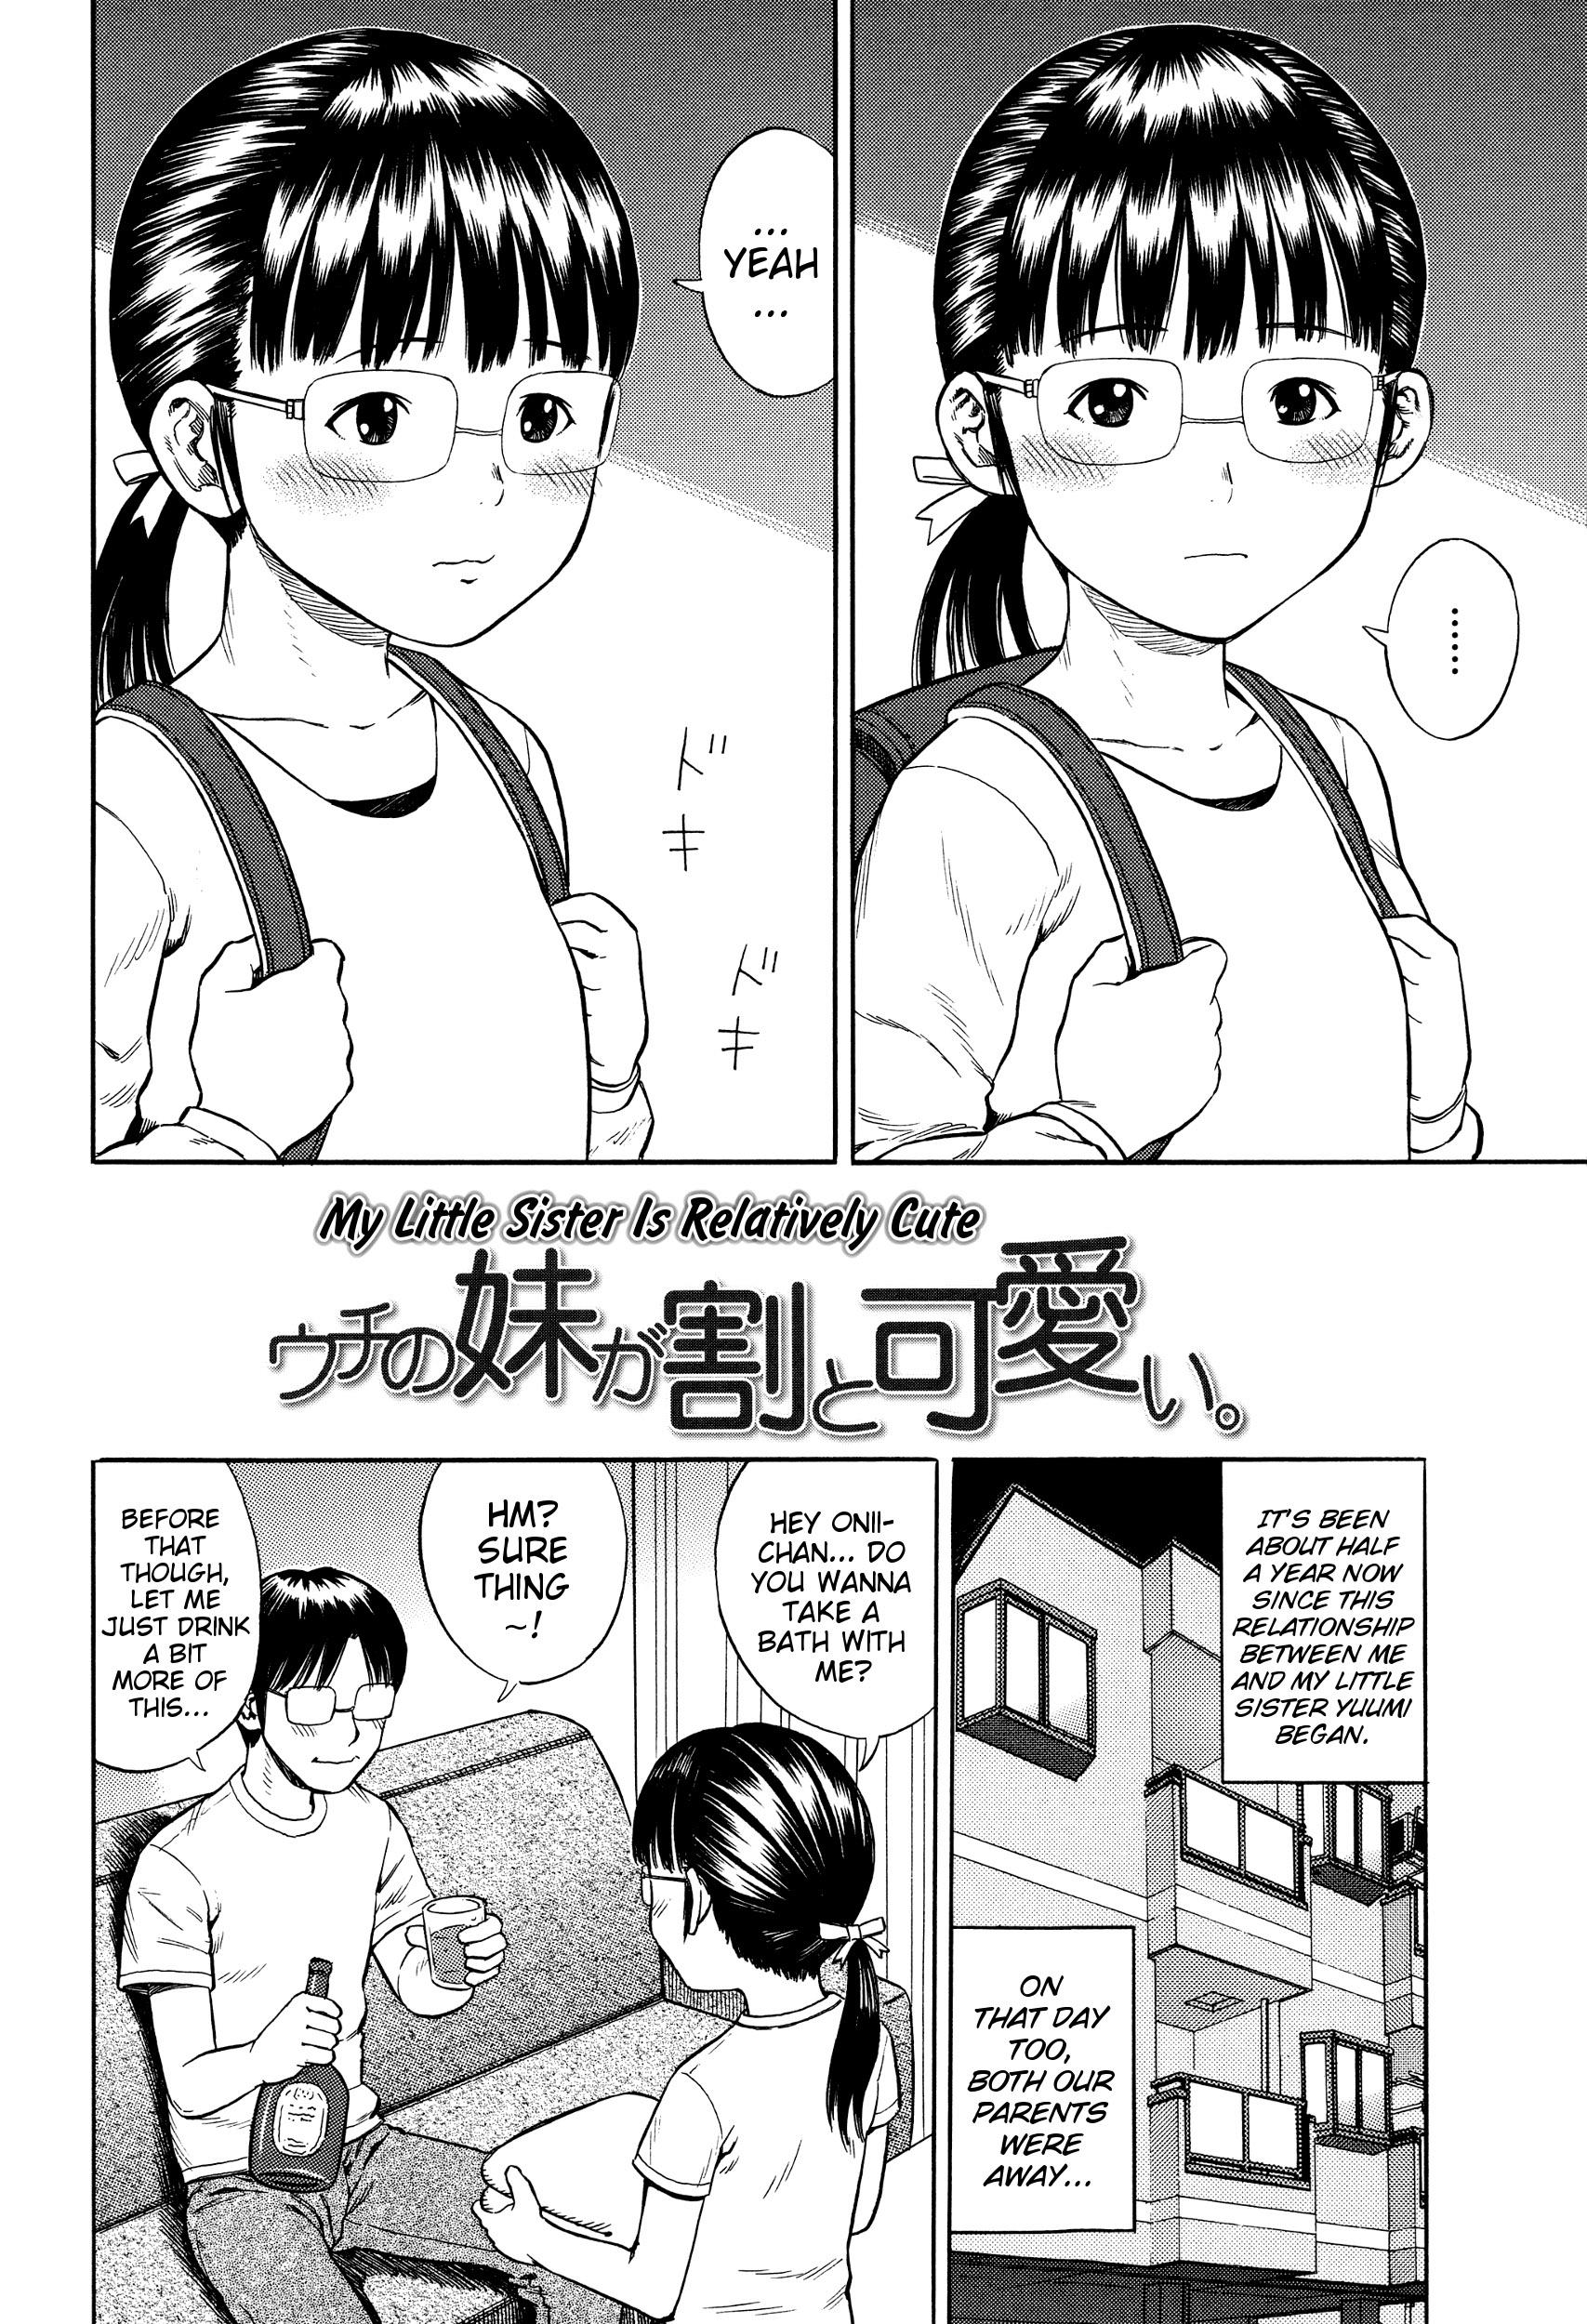 With Uchi no Imouto ga Warito Kawaii | My Little Sister Is Relatively Cute Real Sex - Page 2